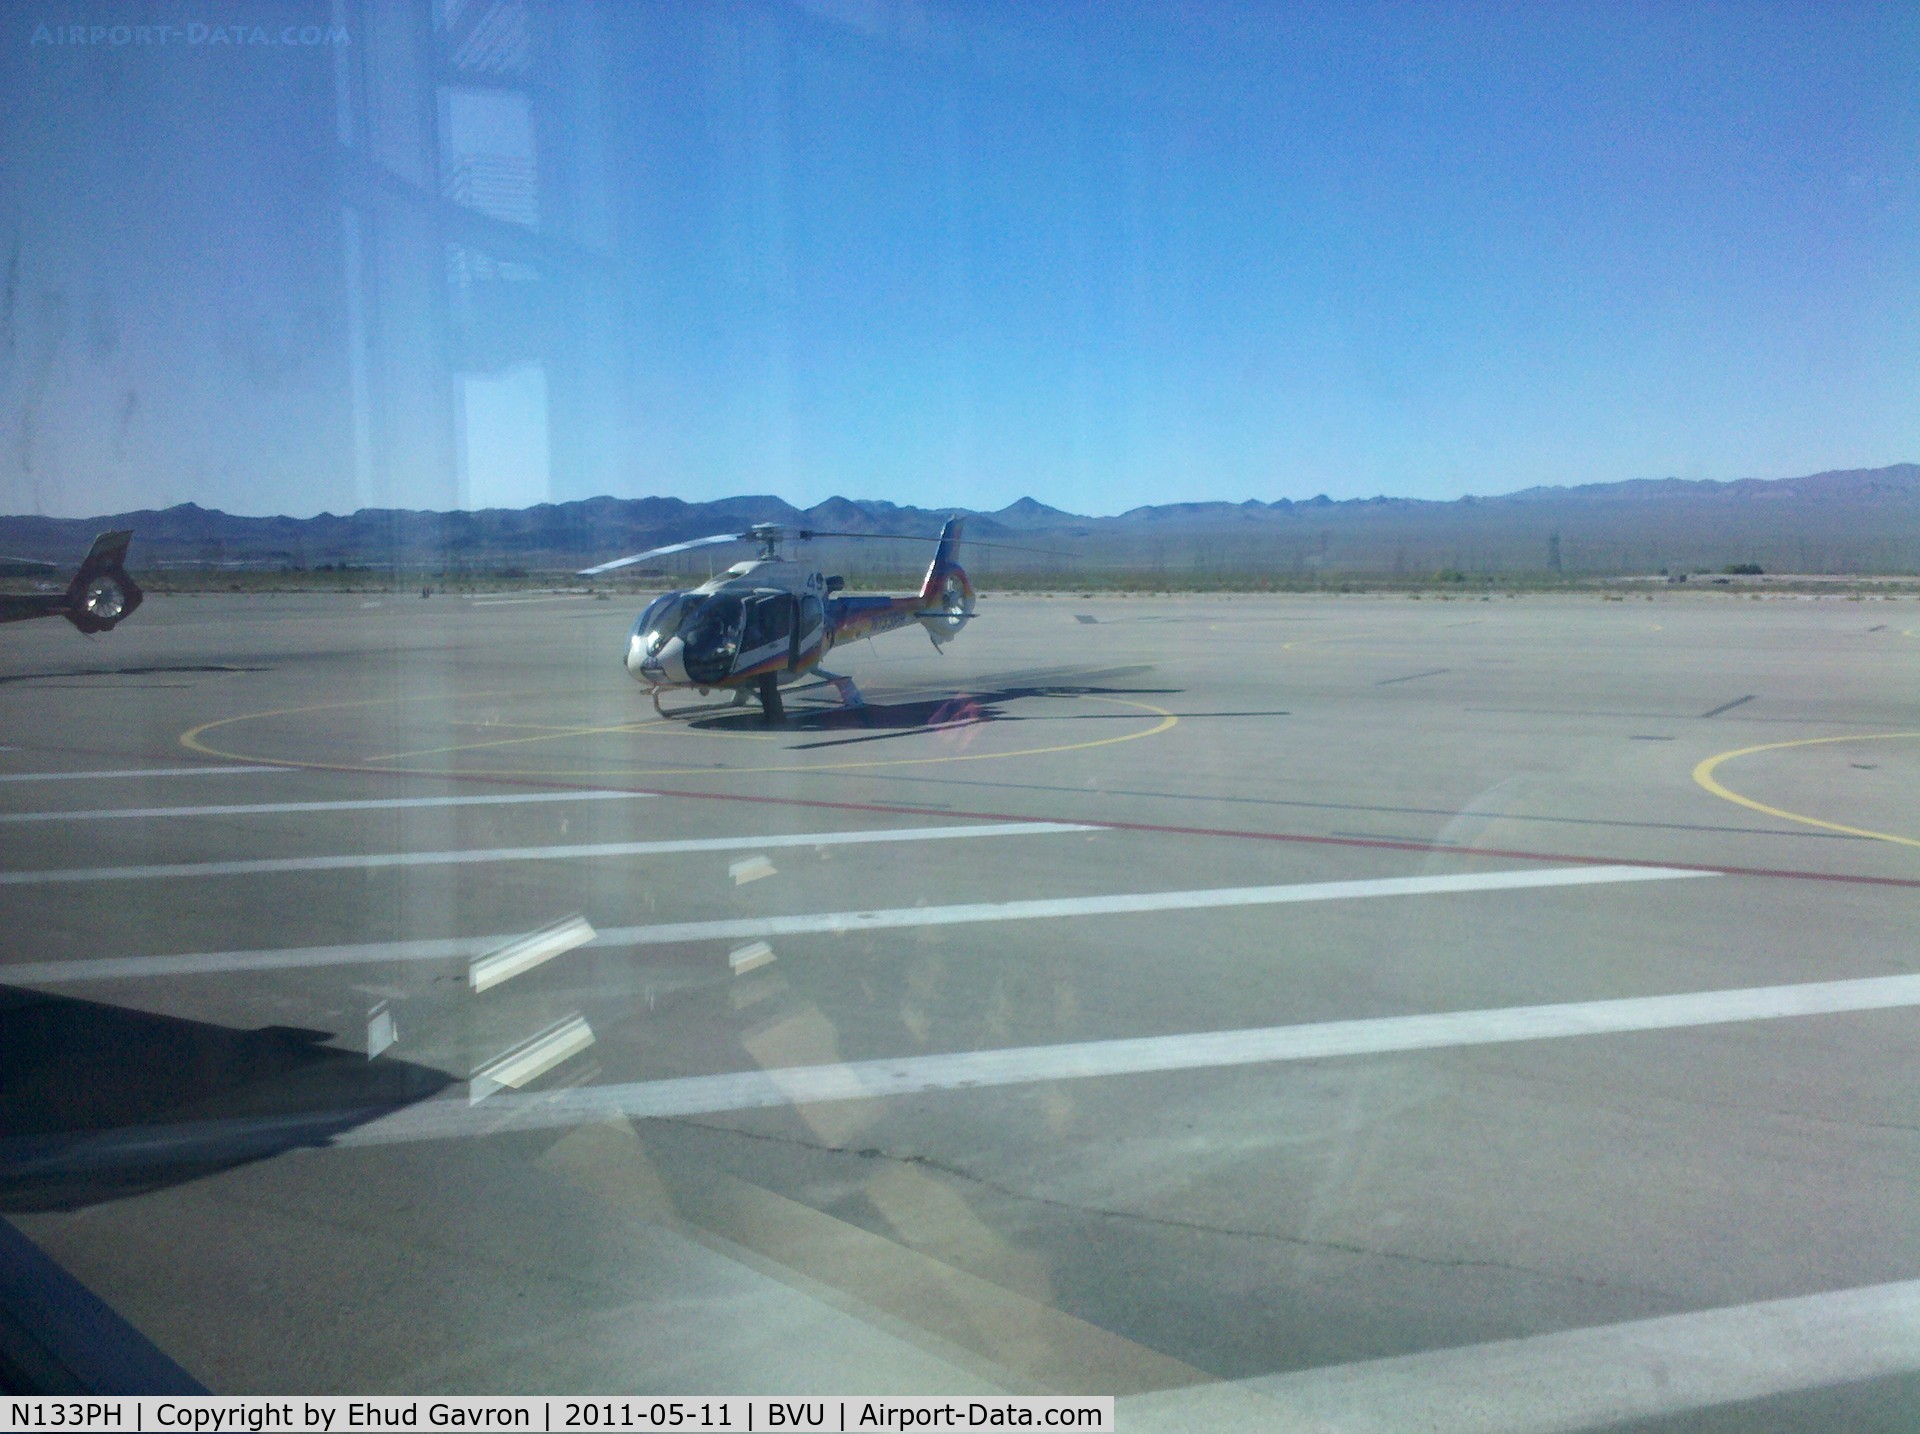 N133PH, Eurocopter EC-130B-4 (AS-350B-4) C/N 3939, Papillon Helicopter parked awaiting tourists going to view the Las Vegas area.